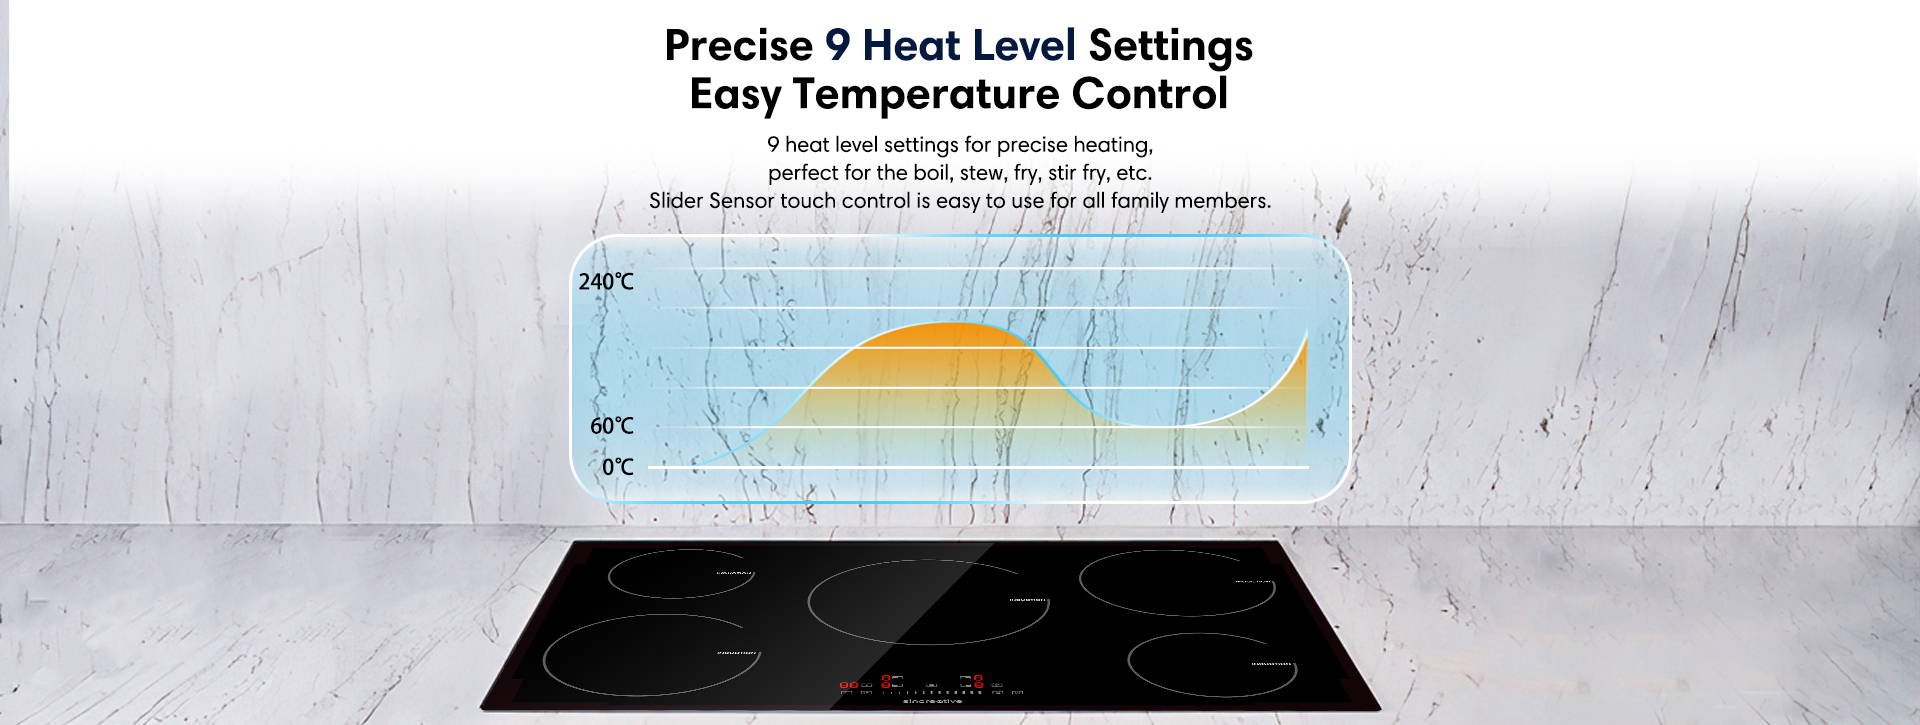 Precise 9 heat level settings easy temperature control 9 heat level settings for precise heating, perfect for the boil, stew, fry, stir fry, etc. Slider Sensor touch control is easy to use for all family members.